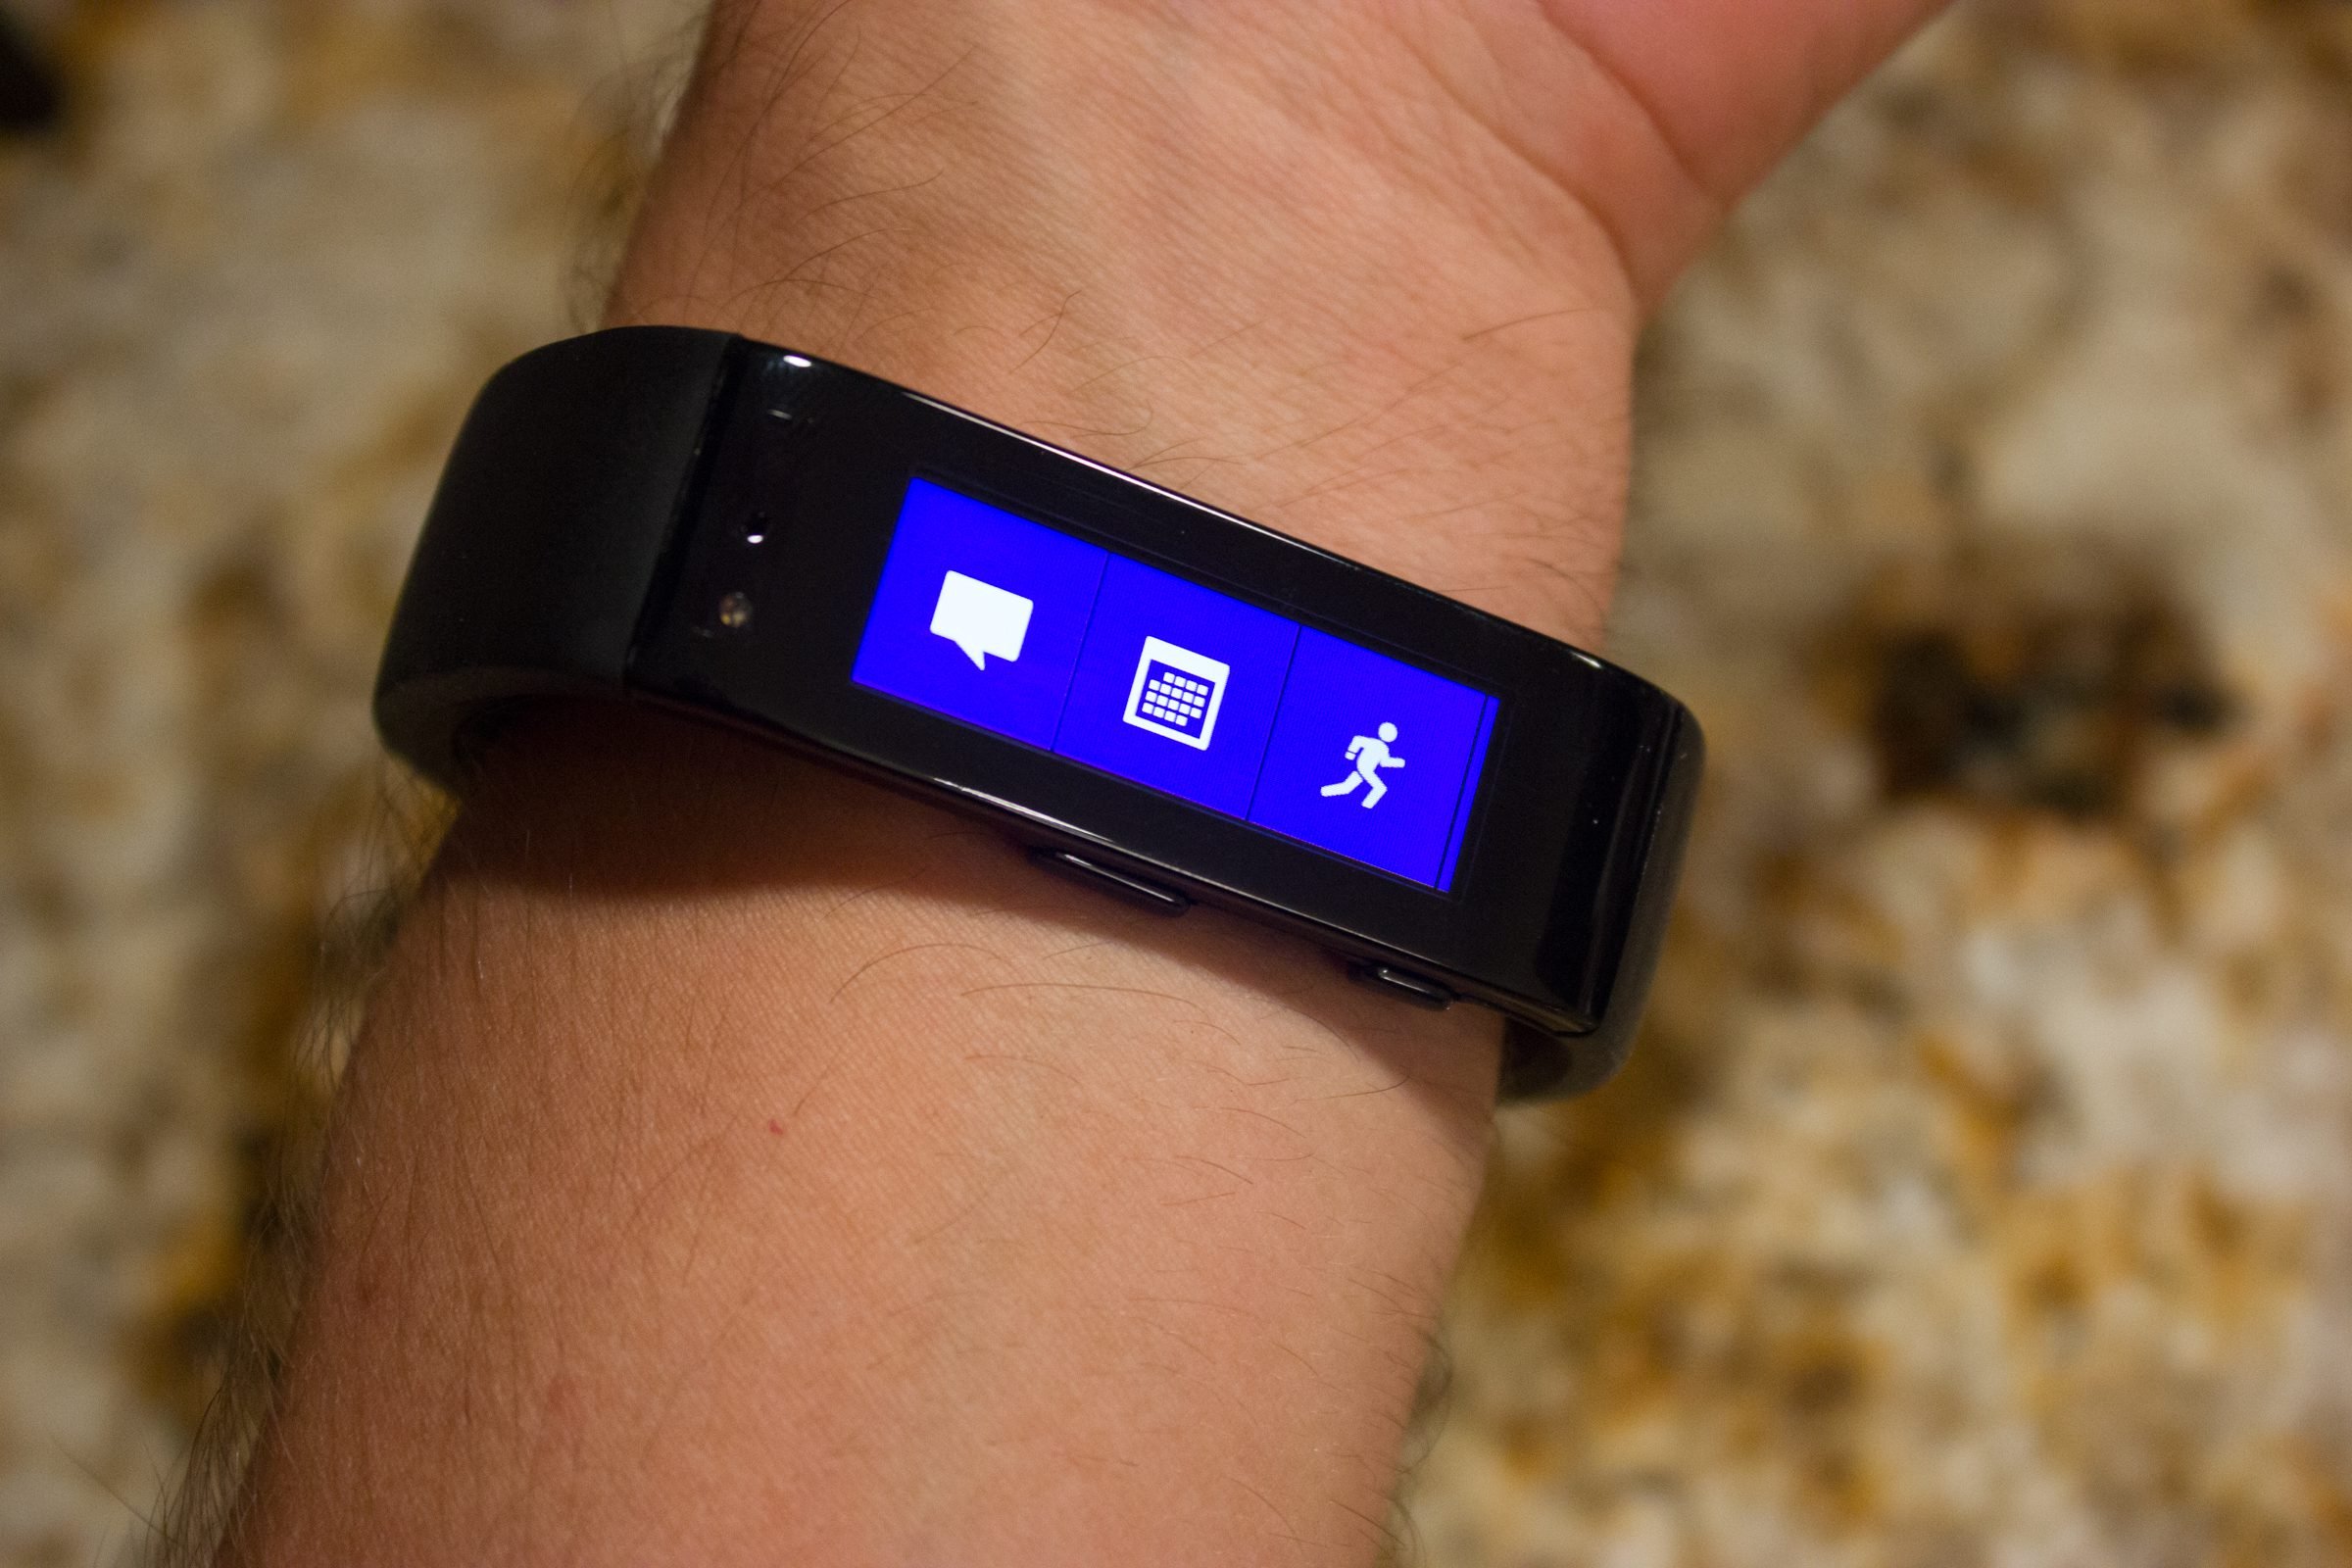 Many people choose to wear the device on the underside of their wrist.